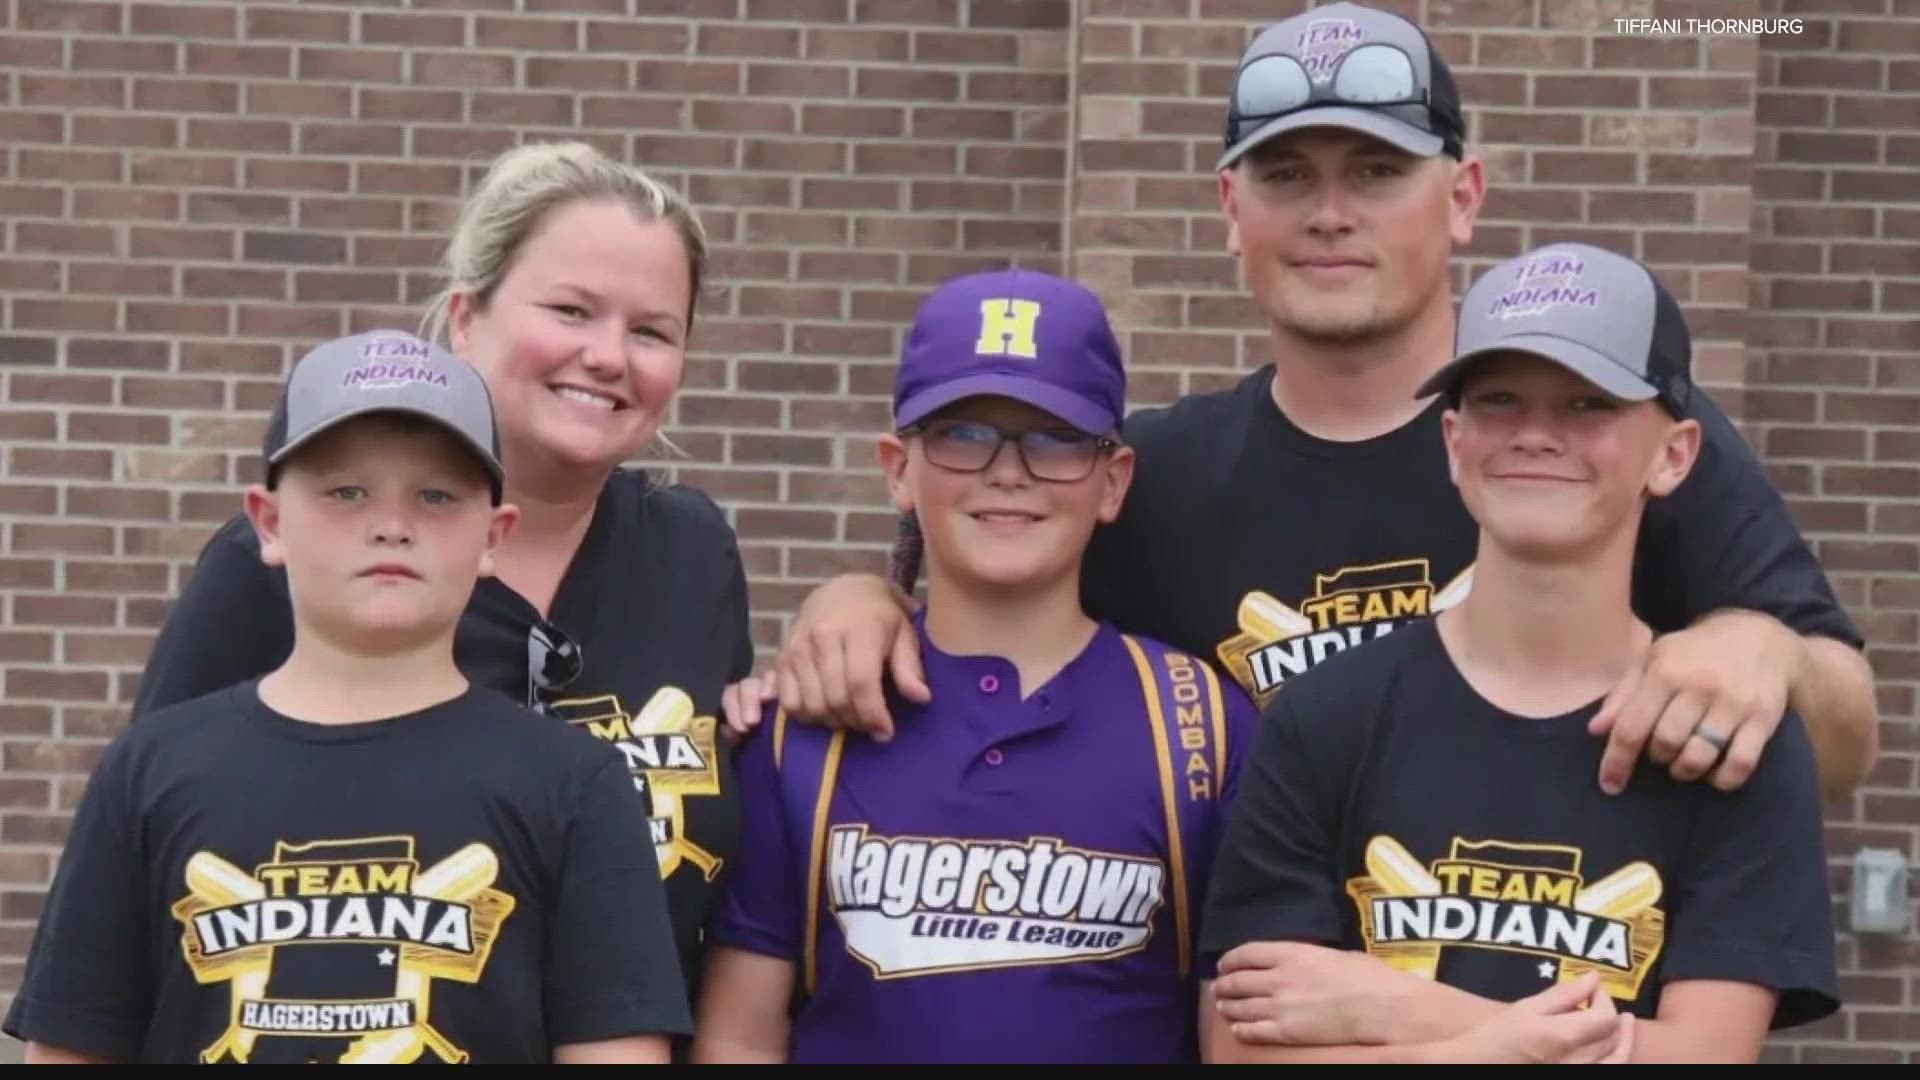 The Little Leaguers from little Hagerstown enjoyed a dramatic walk off win last night about this time to take them to the Little League World Series.